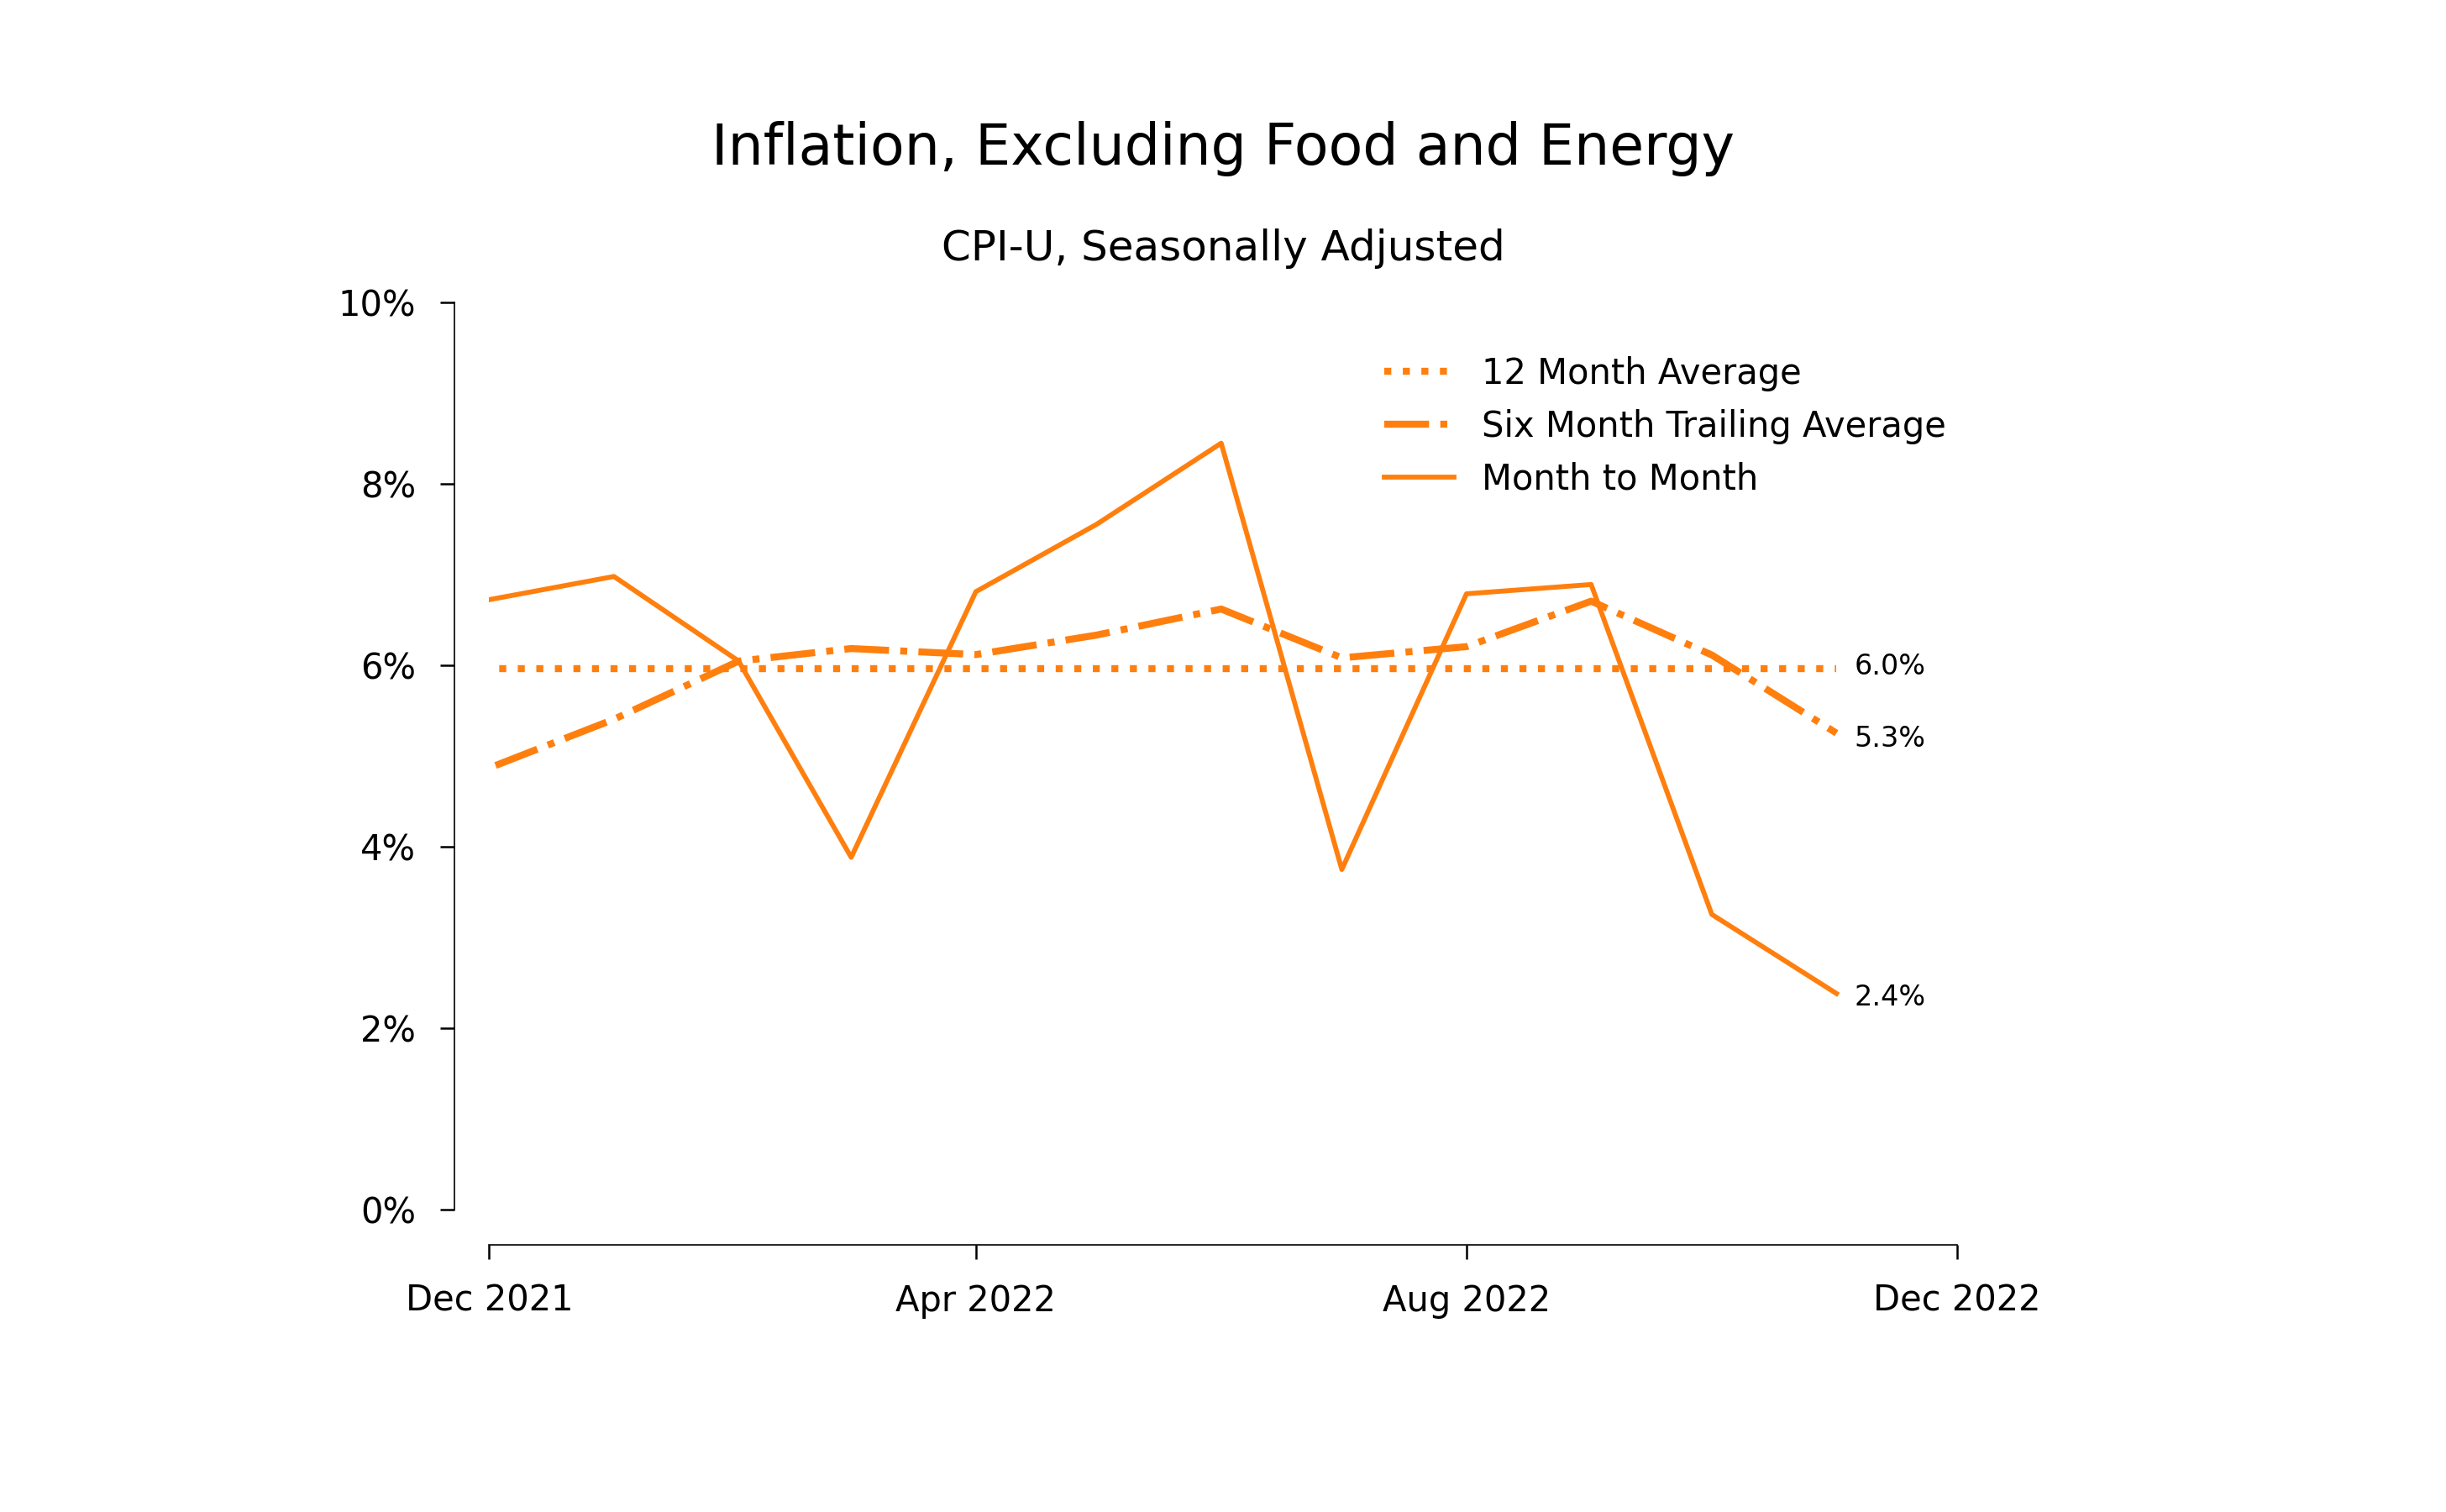 Inflation by month during 2022 excluding food and energy